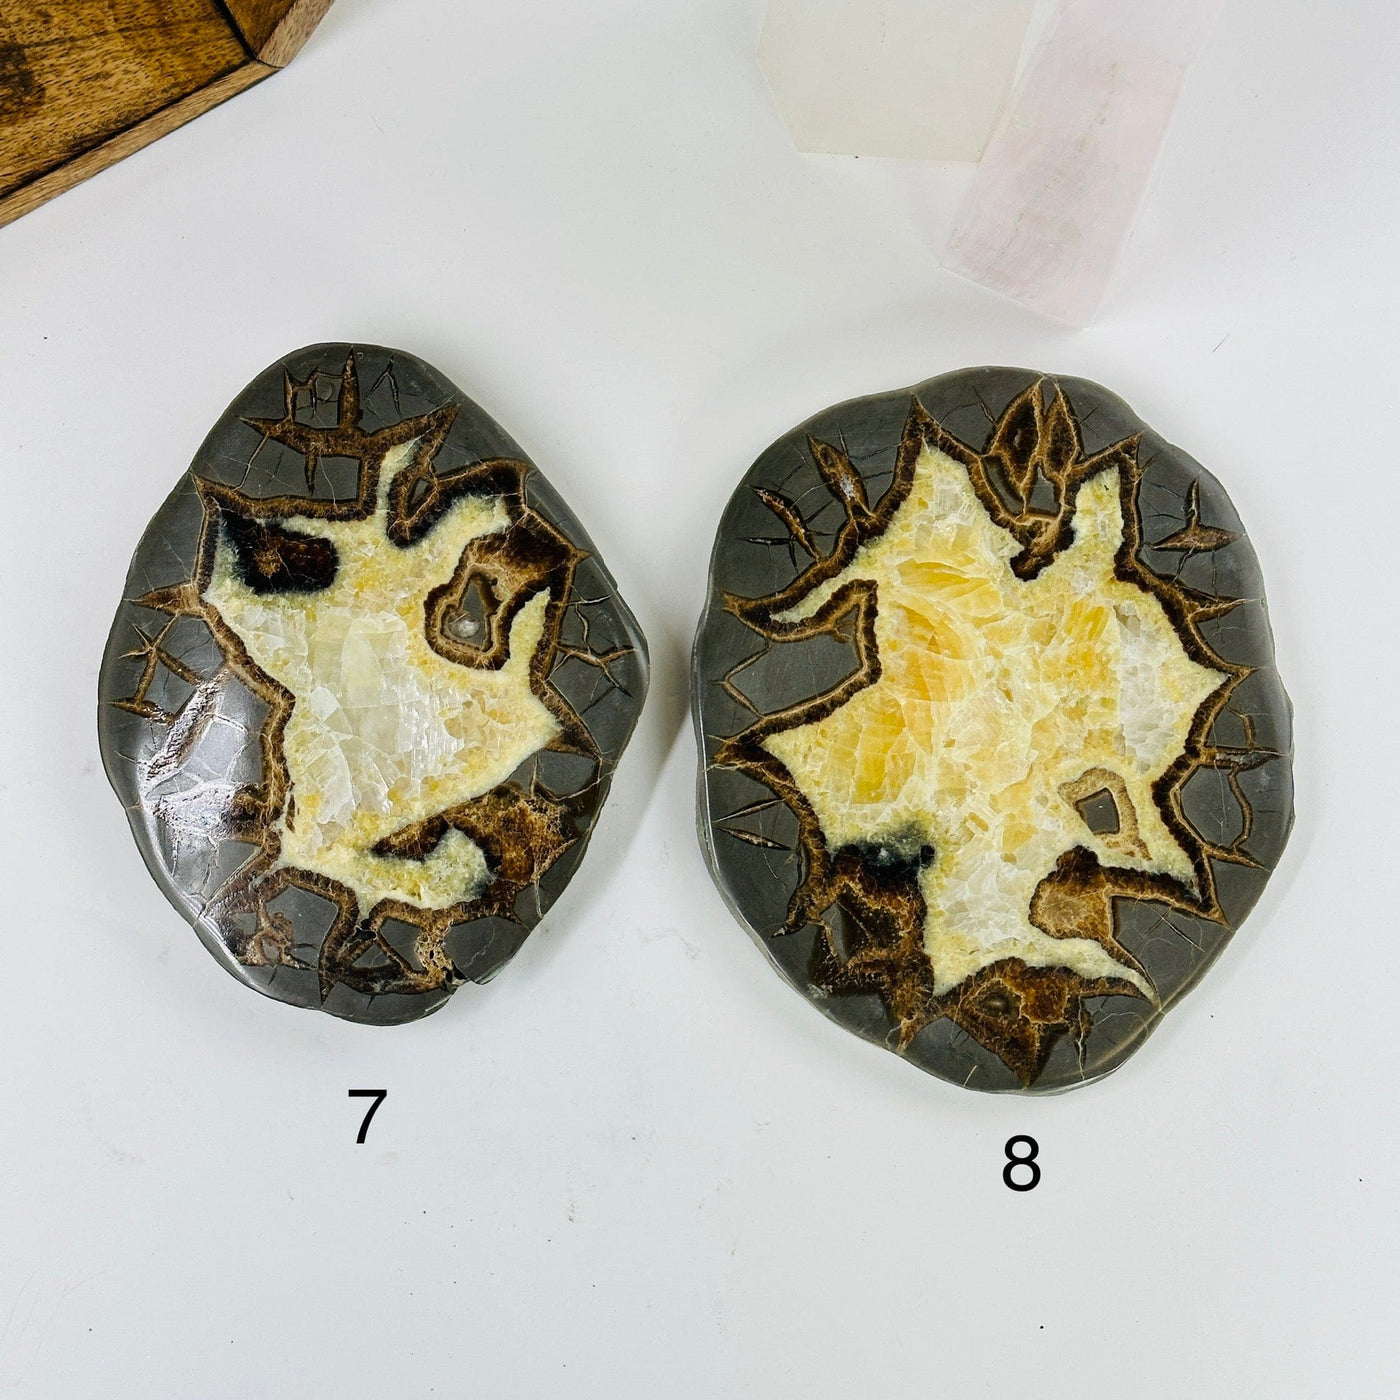 Septarian coaster with decorations in the background 